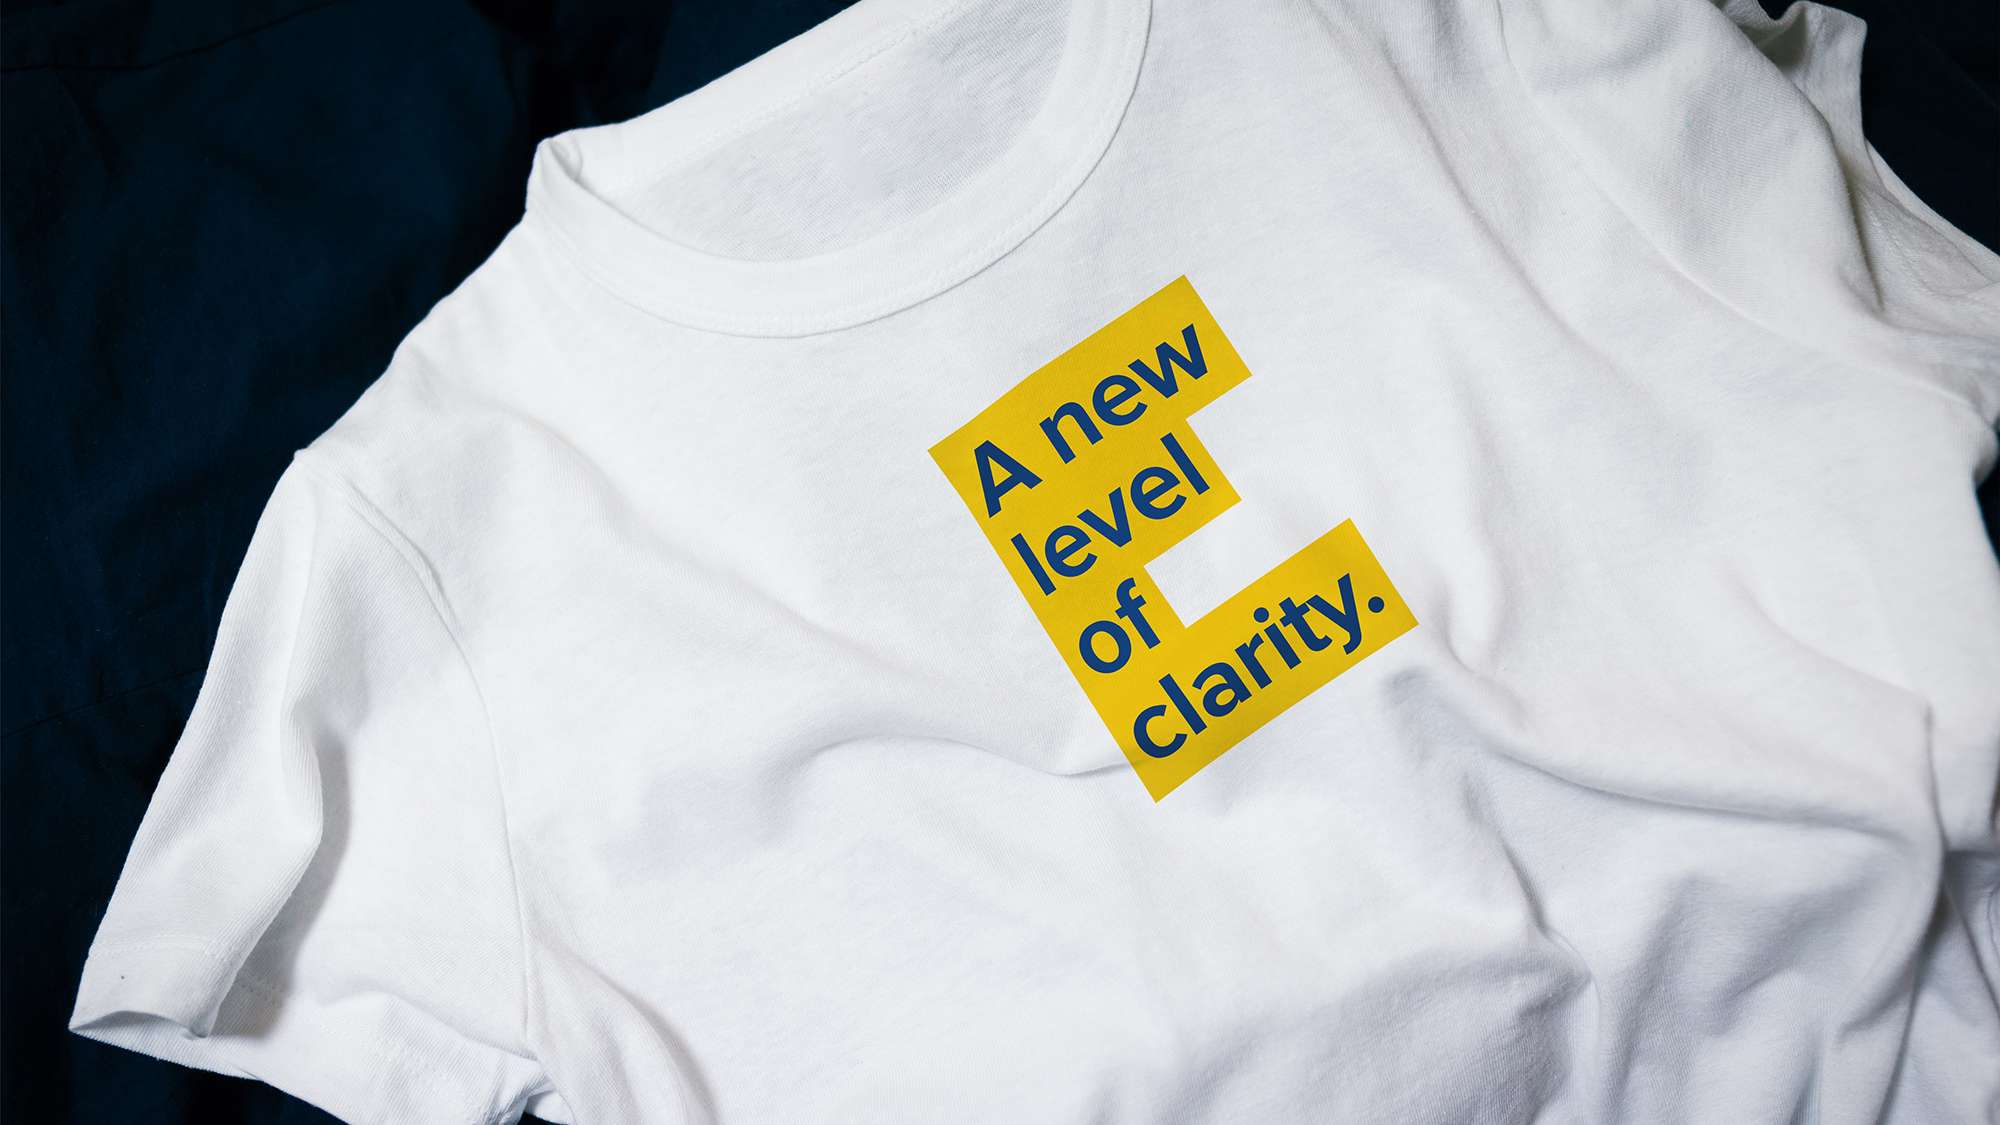 A new level of clarity, text on a tee shirt.